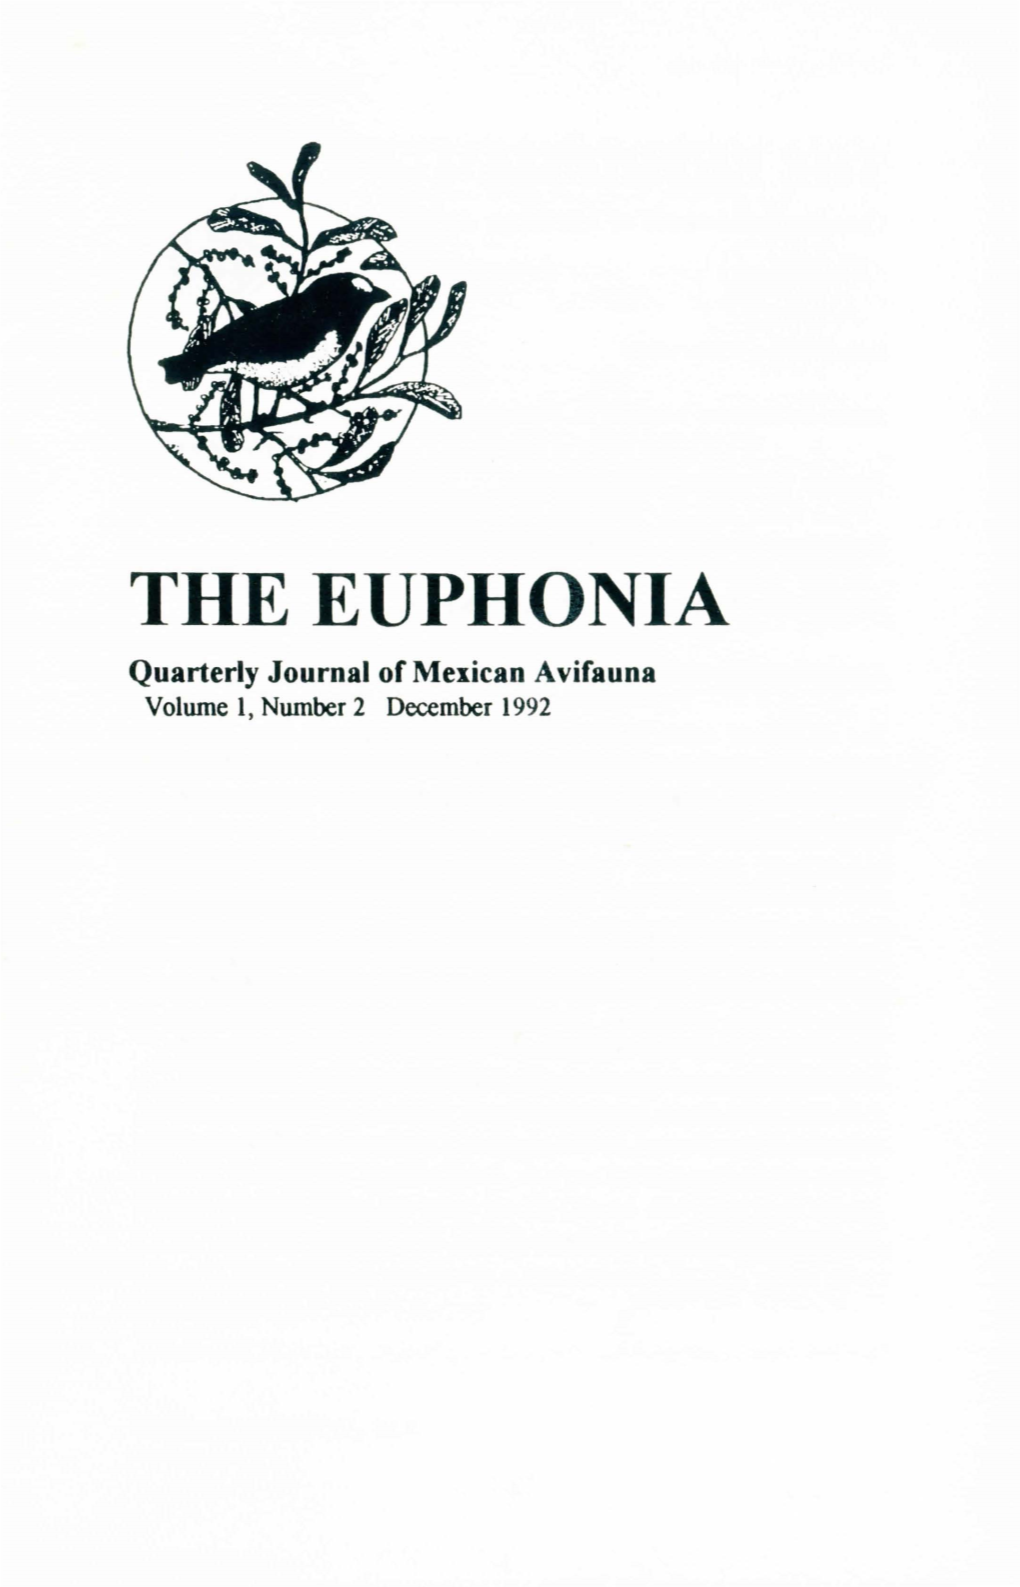 THE EUPHONIA Quarterly Journal of Mexican Avifauna Volume 1, Number 2 December 1992 the EUPHONIA Quarterly Journal of Mexican Avifauna